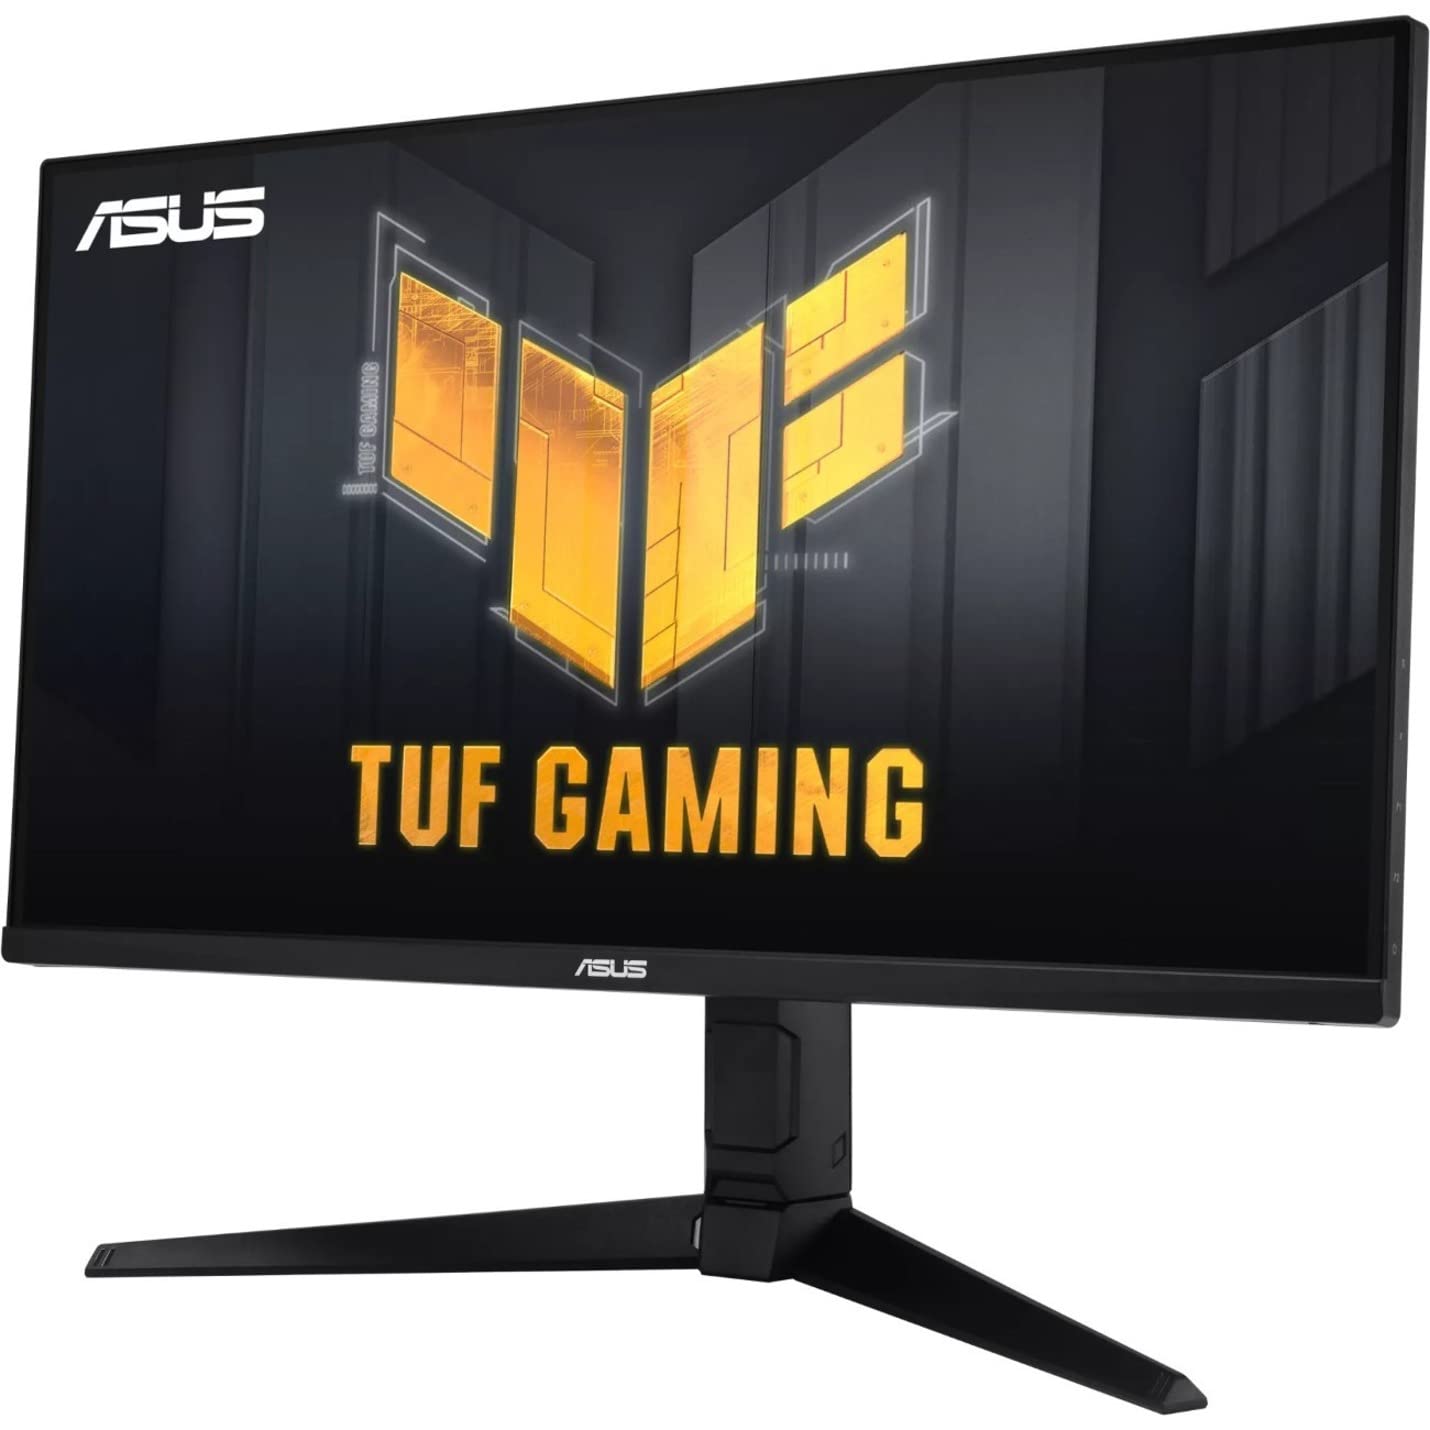 Asus TUF Gaming 28” 4K 144HZ DSC HDMI 2.1 Gaming Monitor (VG28UQL1A) - UHD (3840 x 2160), Fast IPS, 1ms, Extreme Low Motion Blur Sync, G-SYNC Compatible, FreeSync Premium, Eye Care, DCI-P3 90%